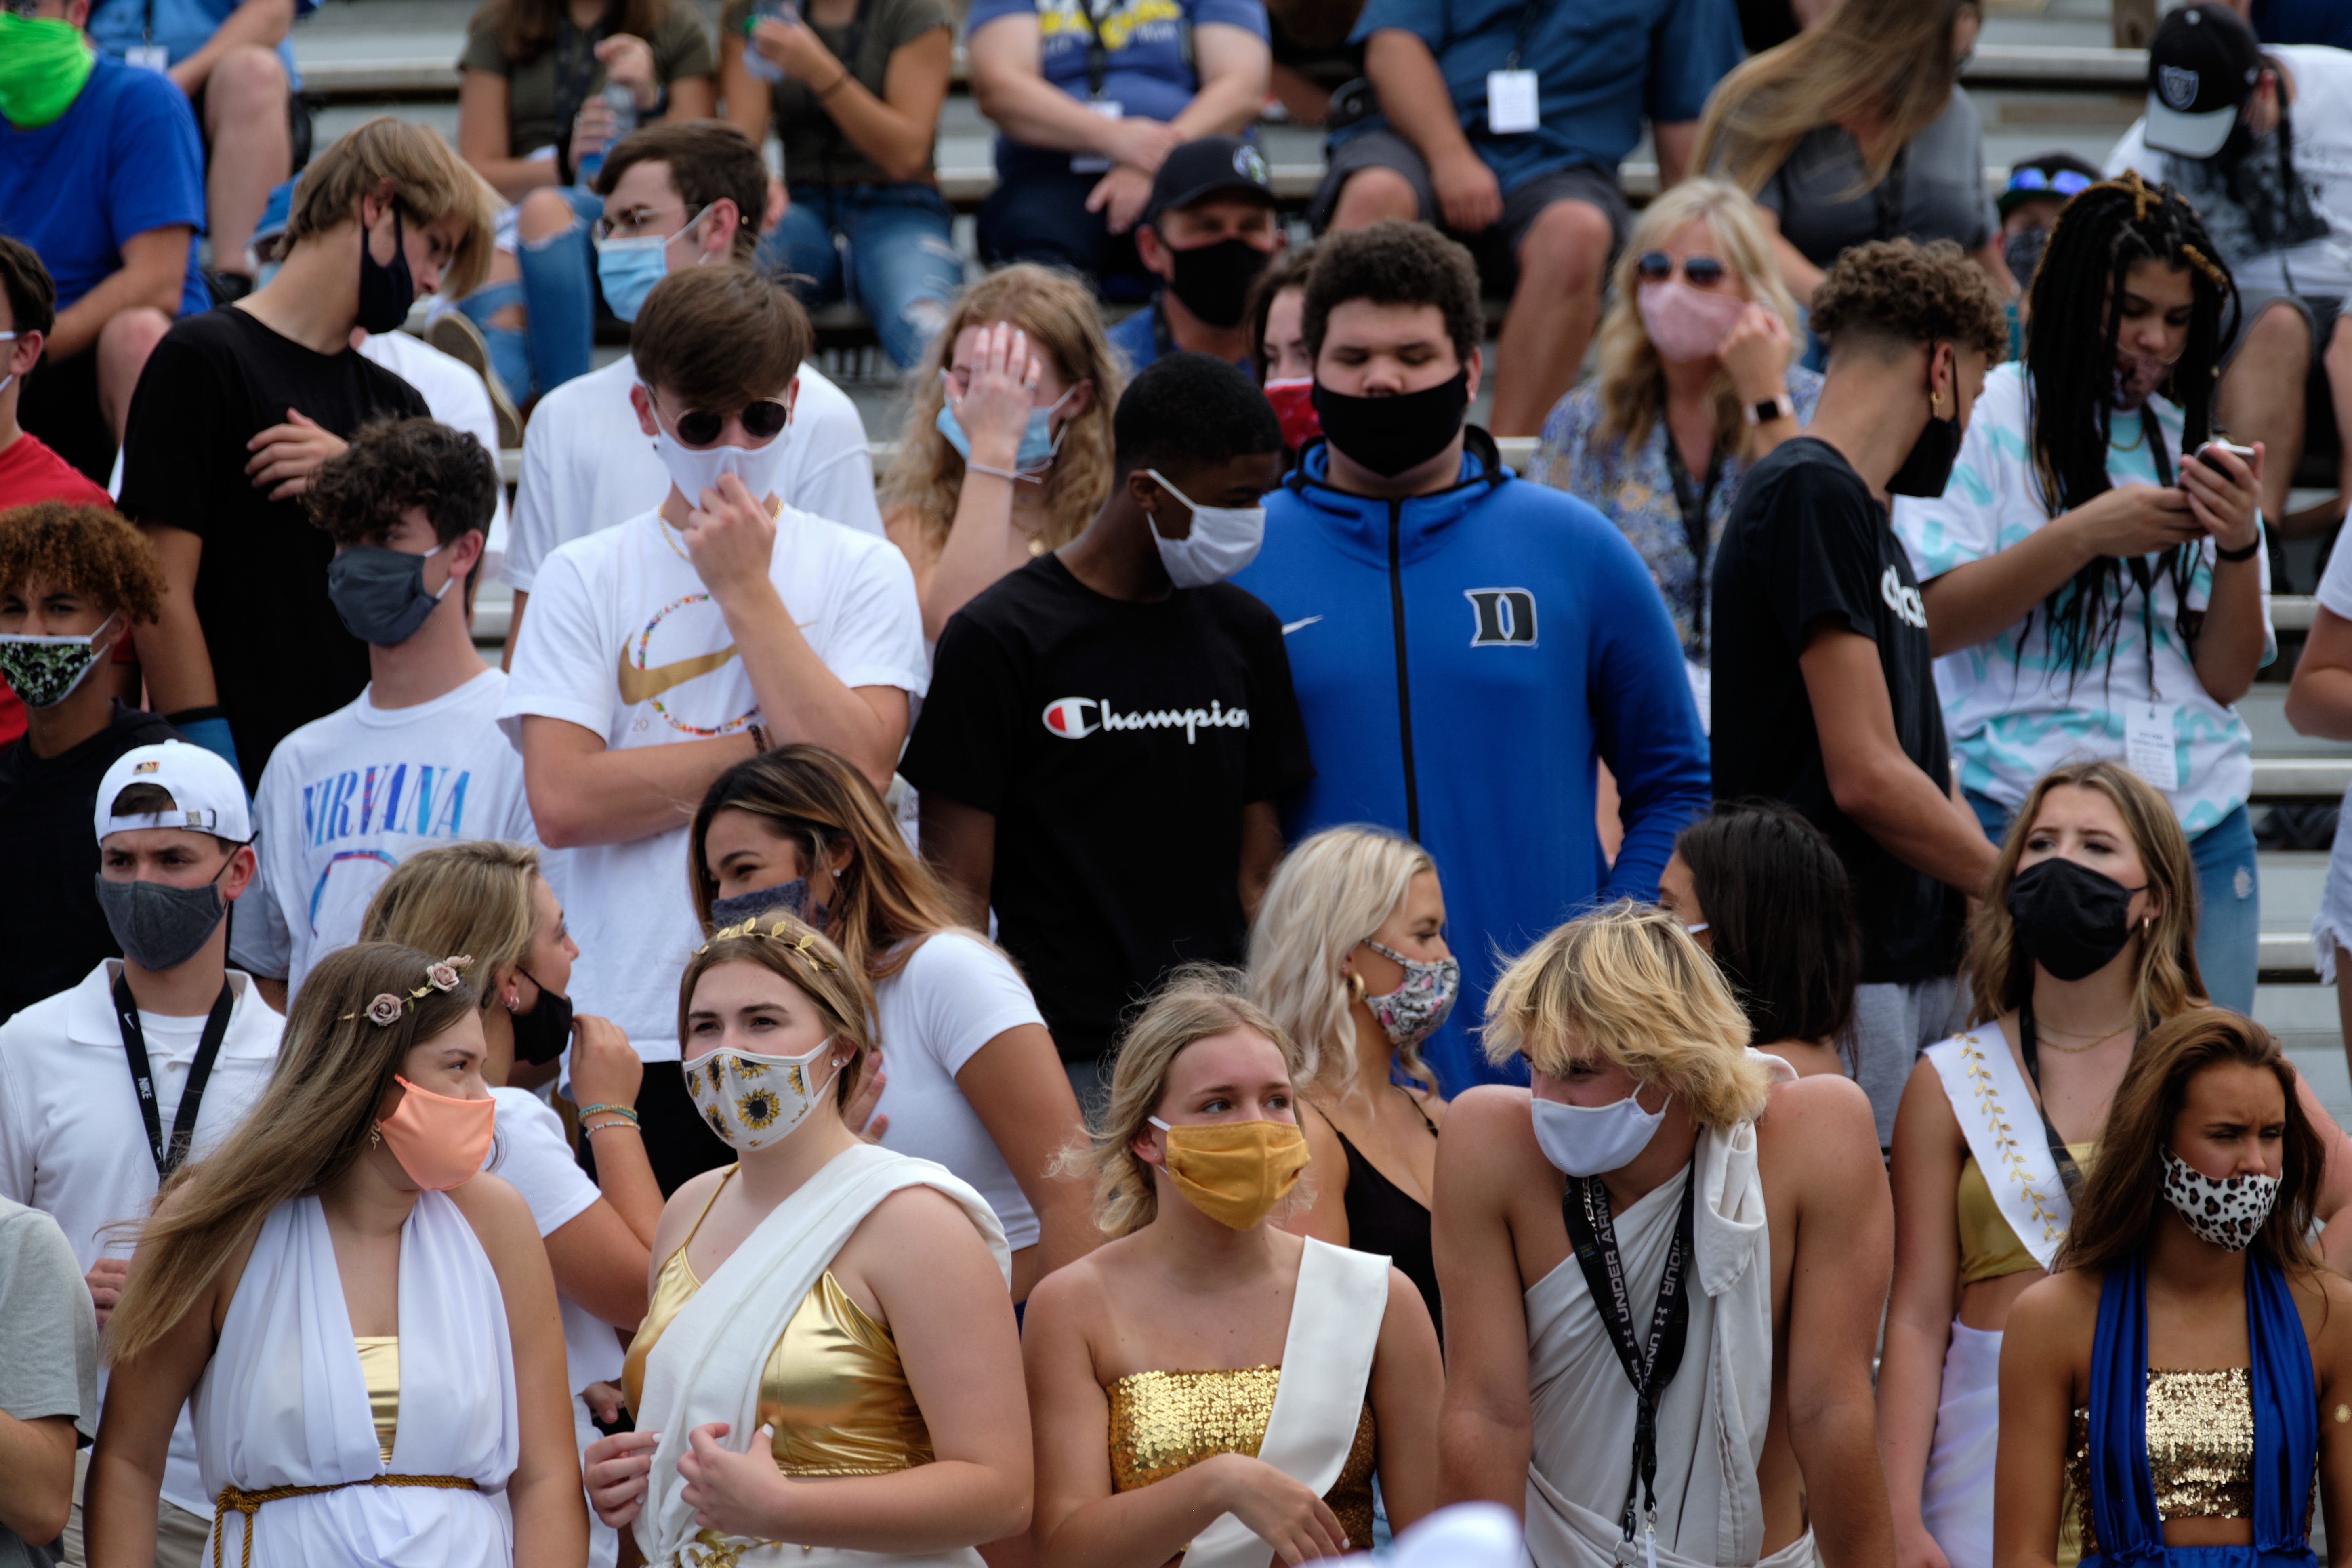 The student section at Karns High School in Knoxville, Tenn., watches their football team take the field Aug. 29.